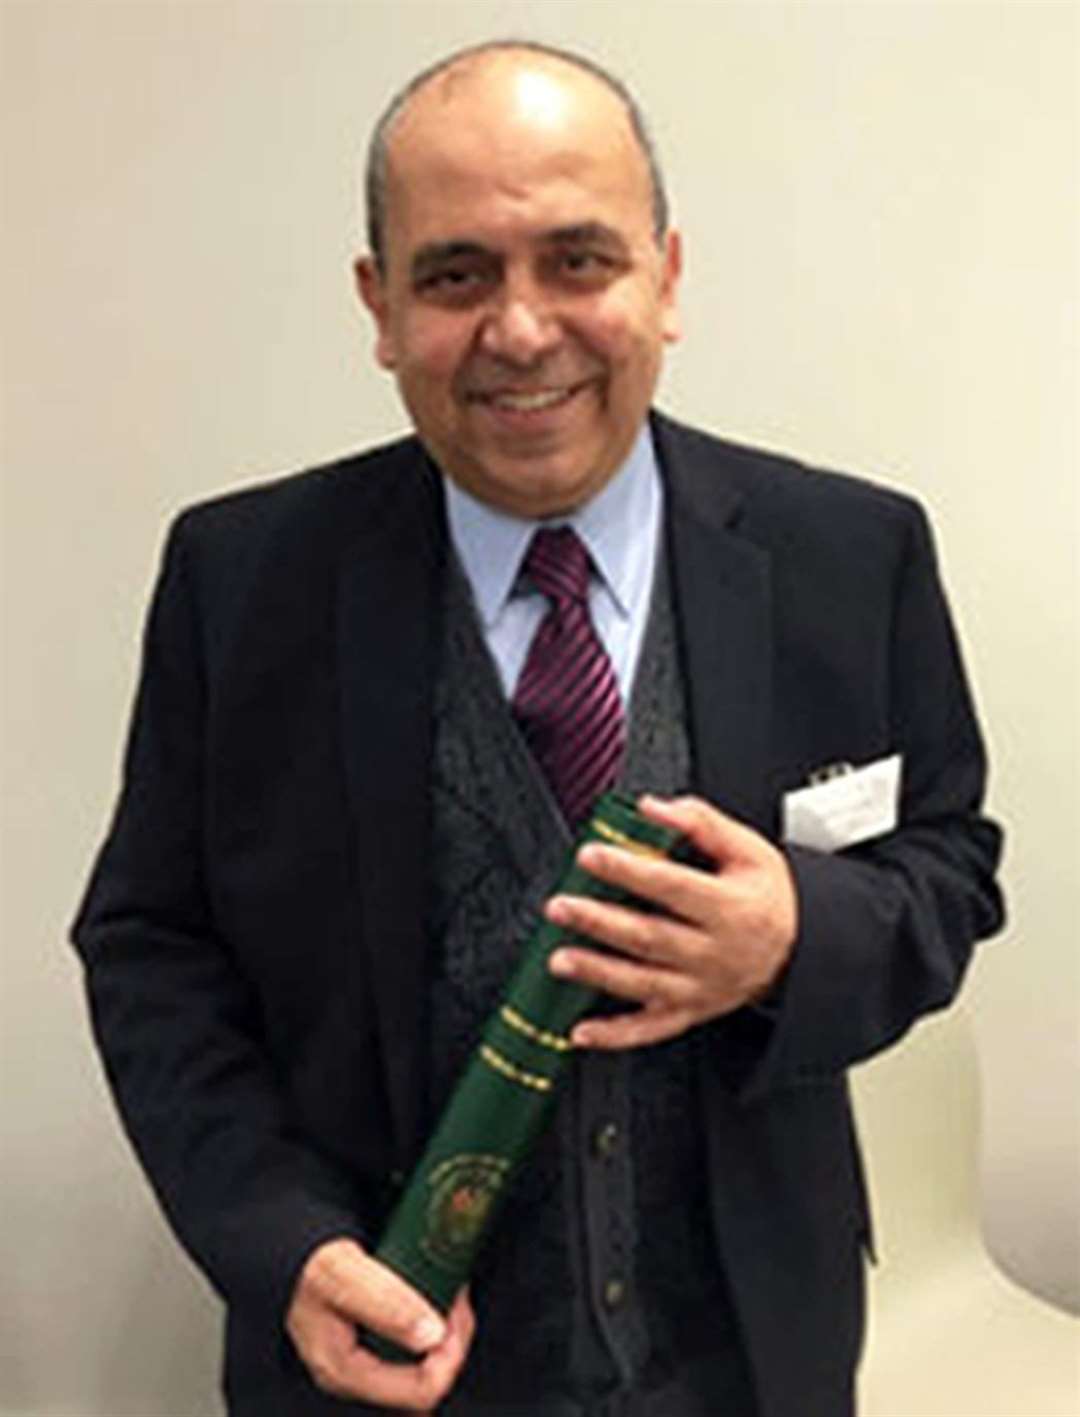 Dr Medhat Atalla died following treatment for Covid-19 at Doncaster Royal Infirmary (Doncaster and Bassetlaw Teaching Hospitals/PA)